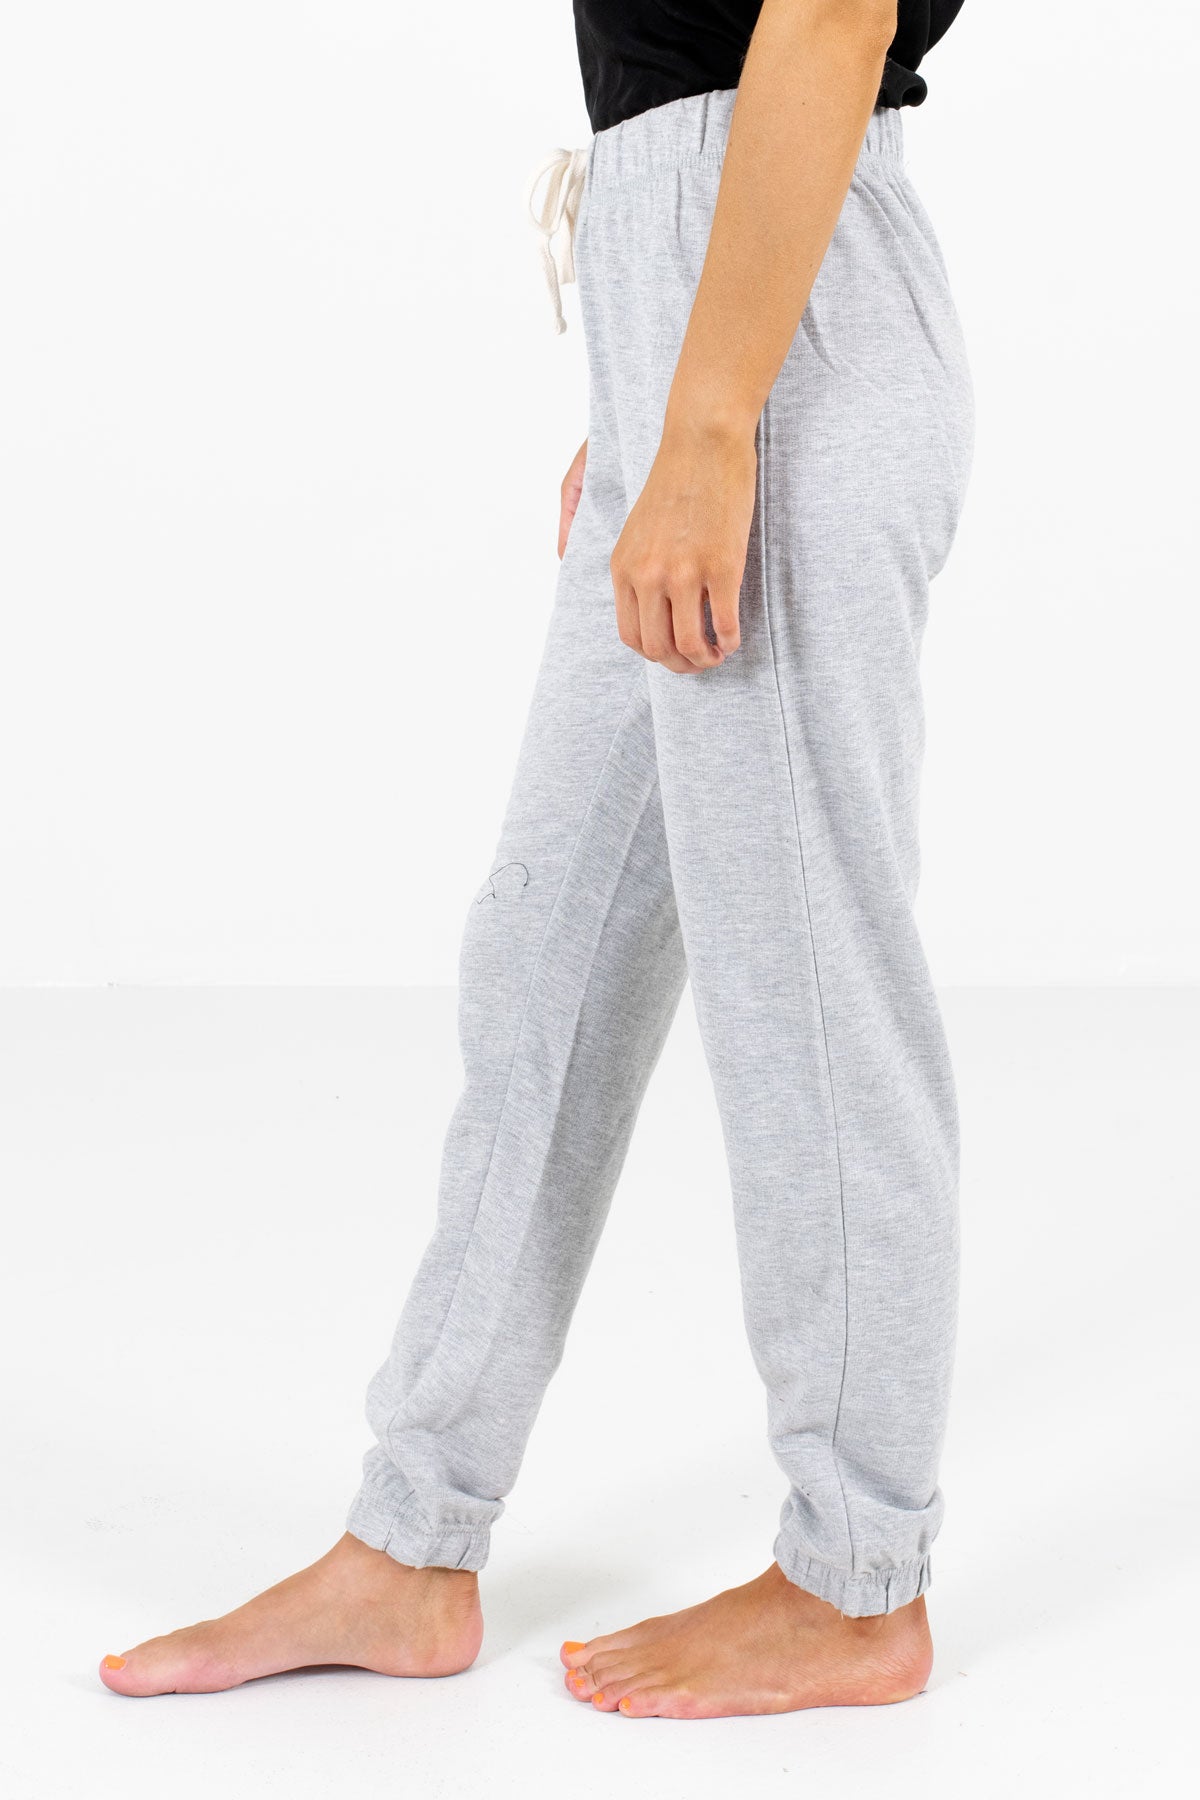 Heather Gray Lightweight High-Quality Material Boutique Joggers for Women